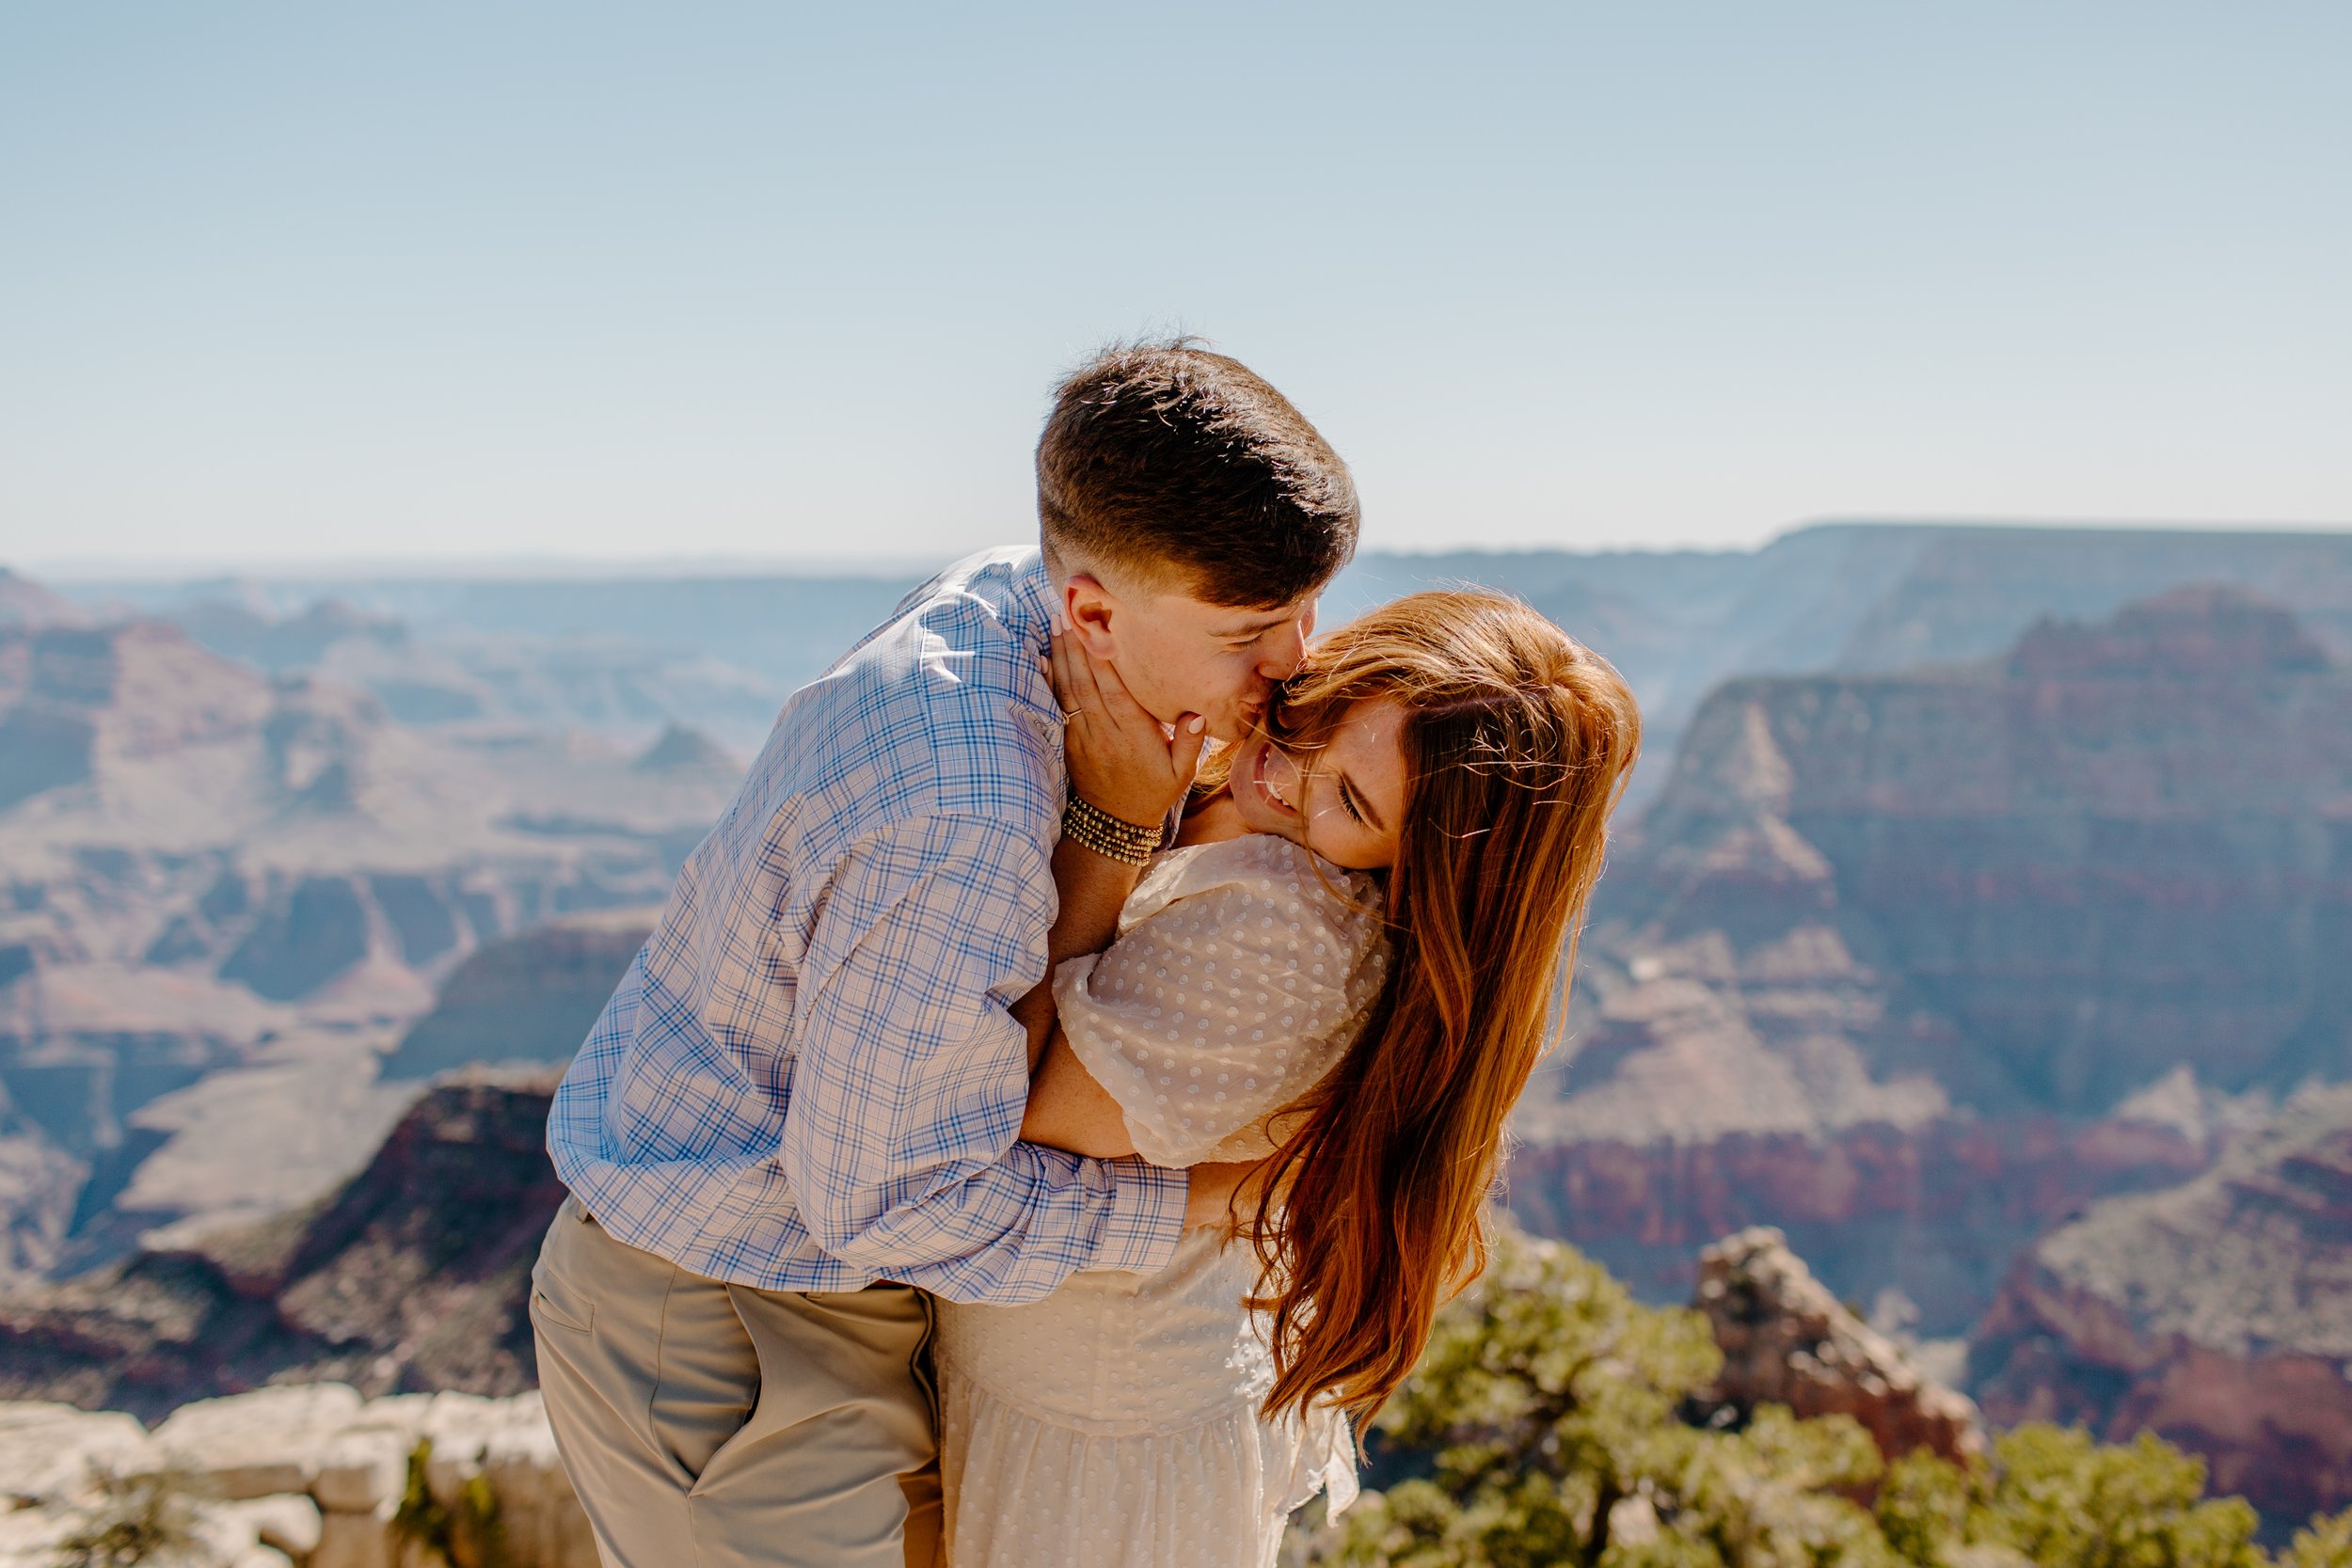  Man kisses his fiance on the cheek at the edge of the Grand Canyon 